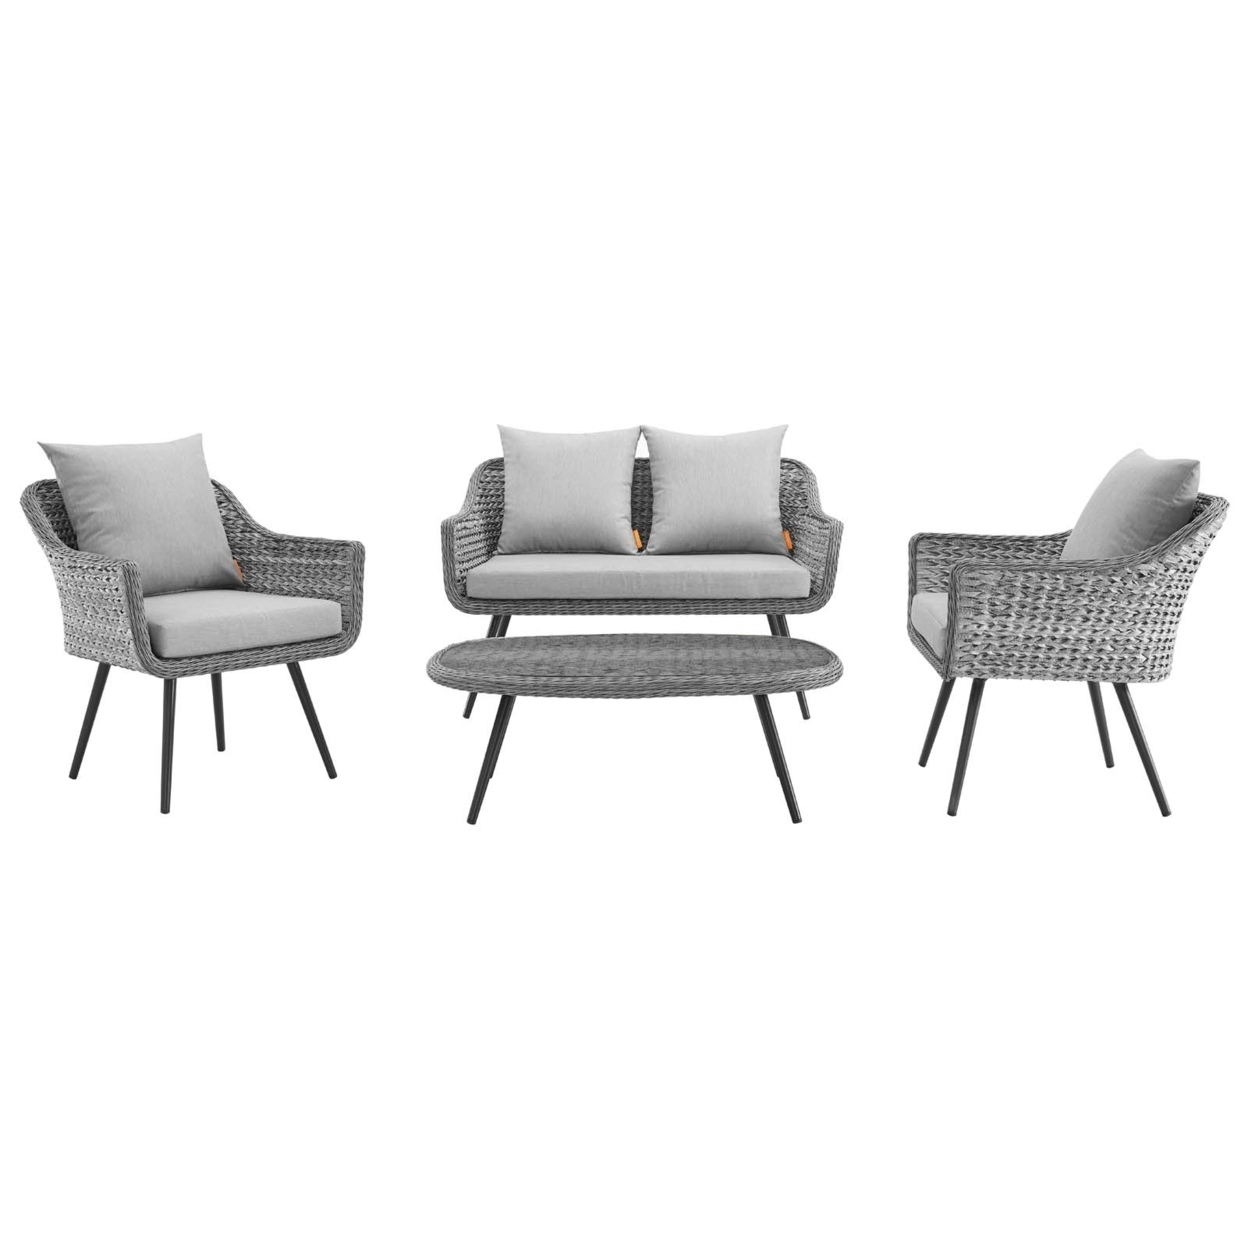 Endeavor 4 Piece Outdoor Patio Wicker Rattan Loveseat Armchair And Coffee Table Set, Gray Gray